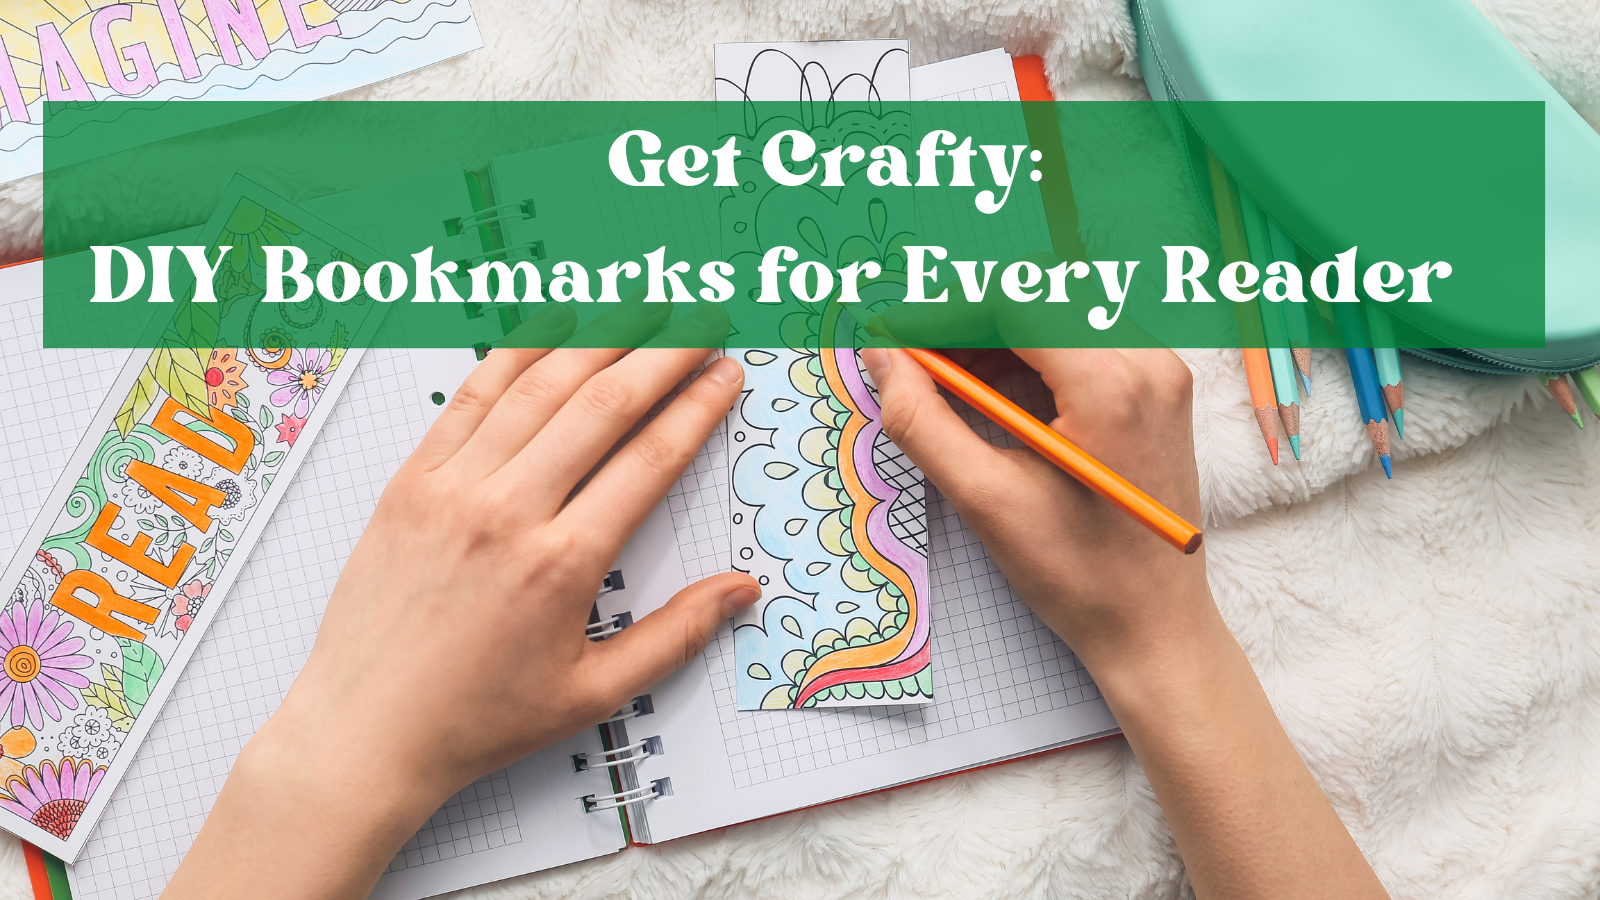 DIY Bookmarks for everyday readers